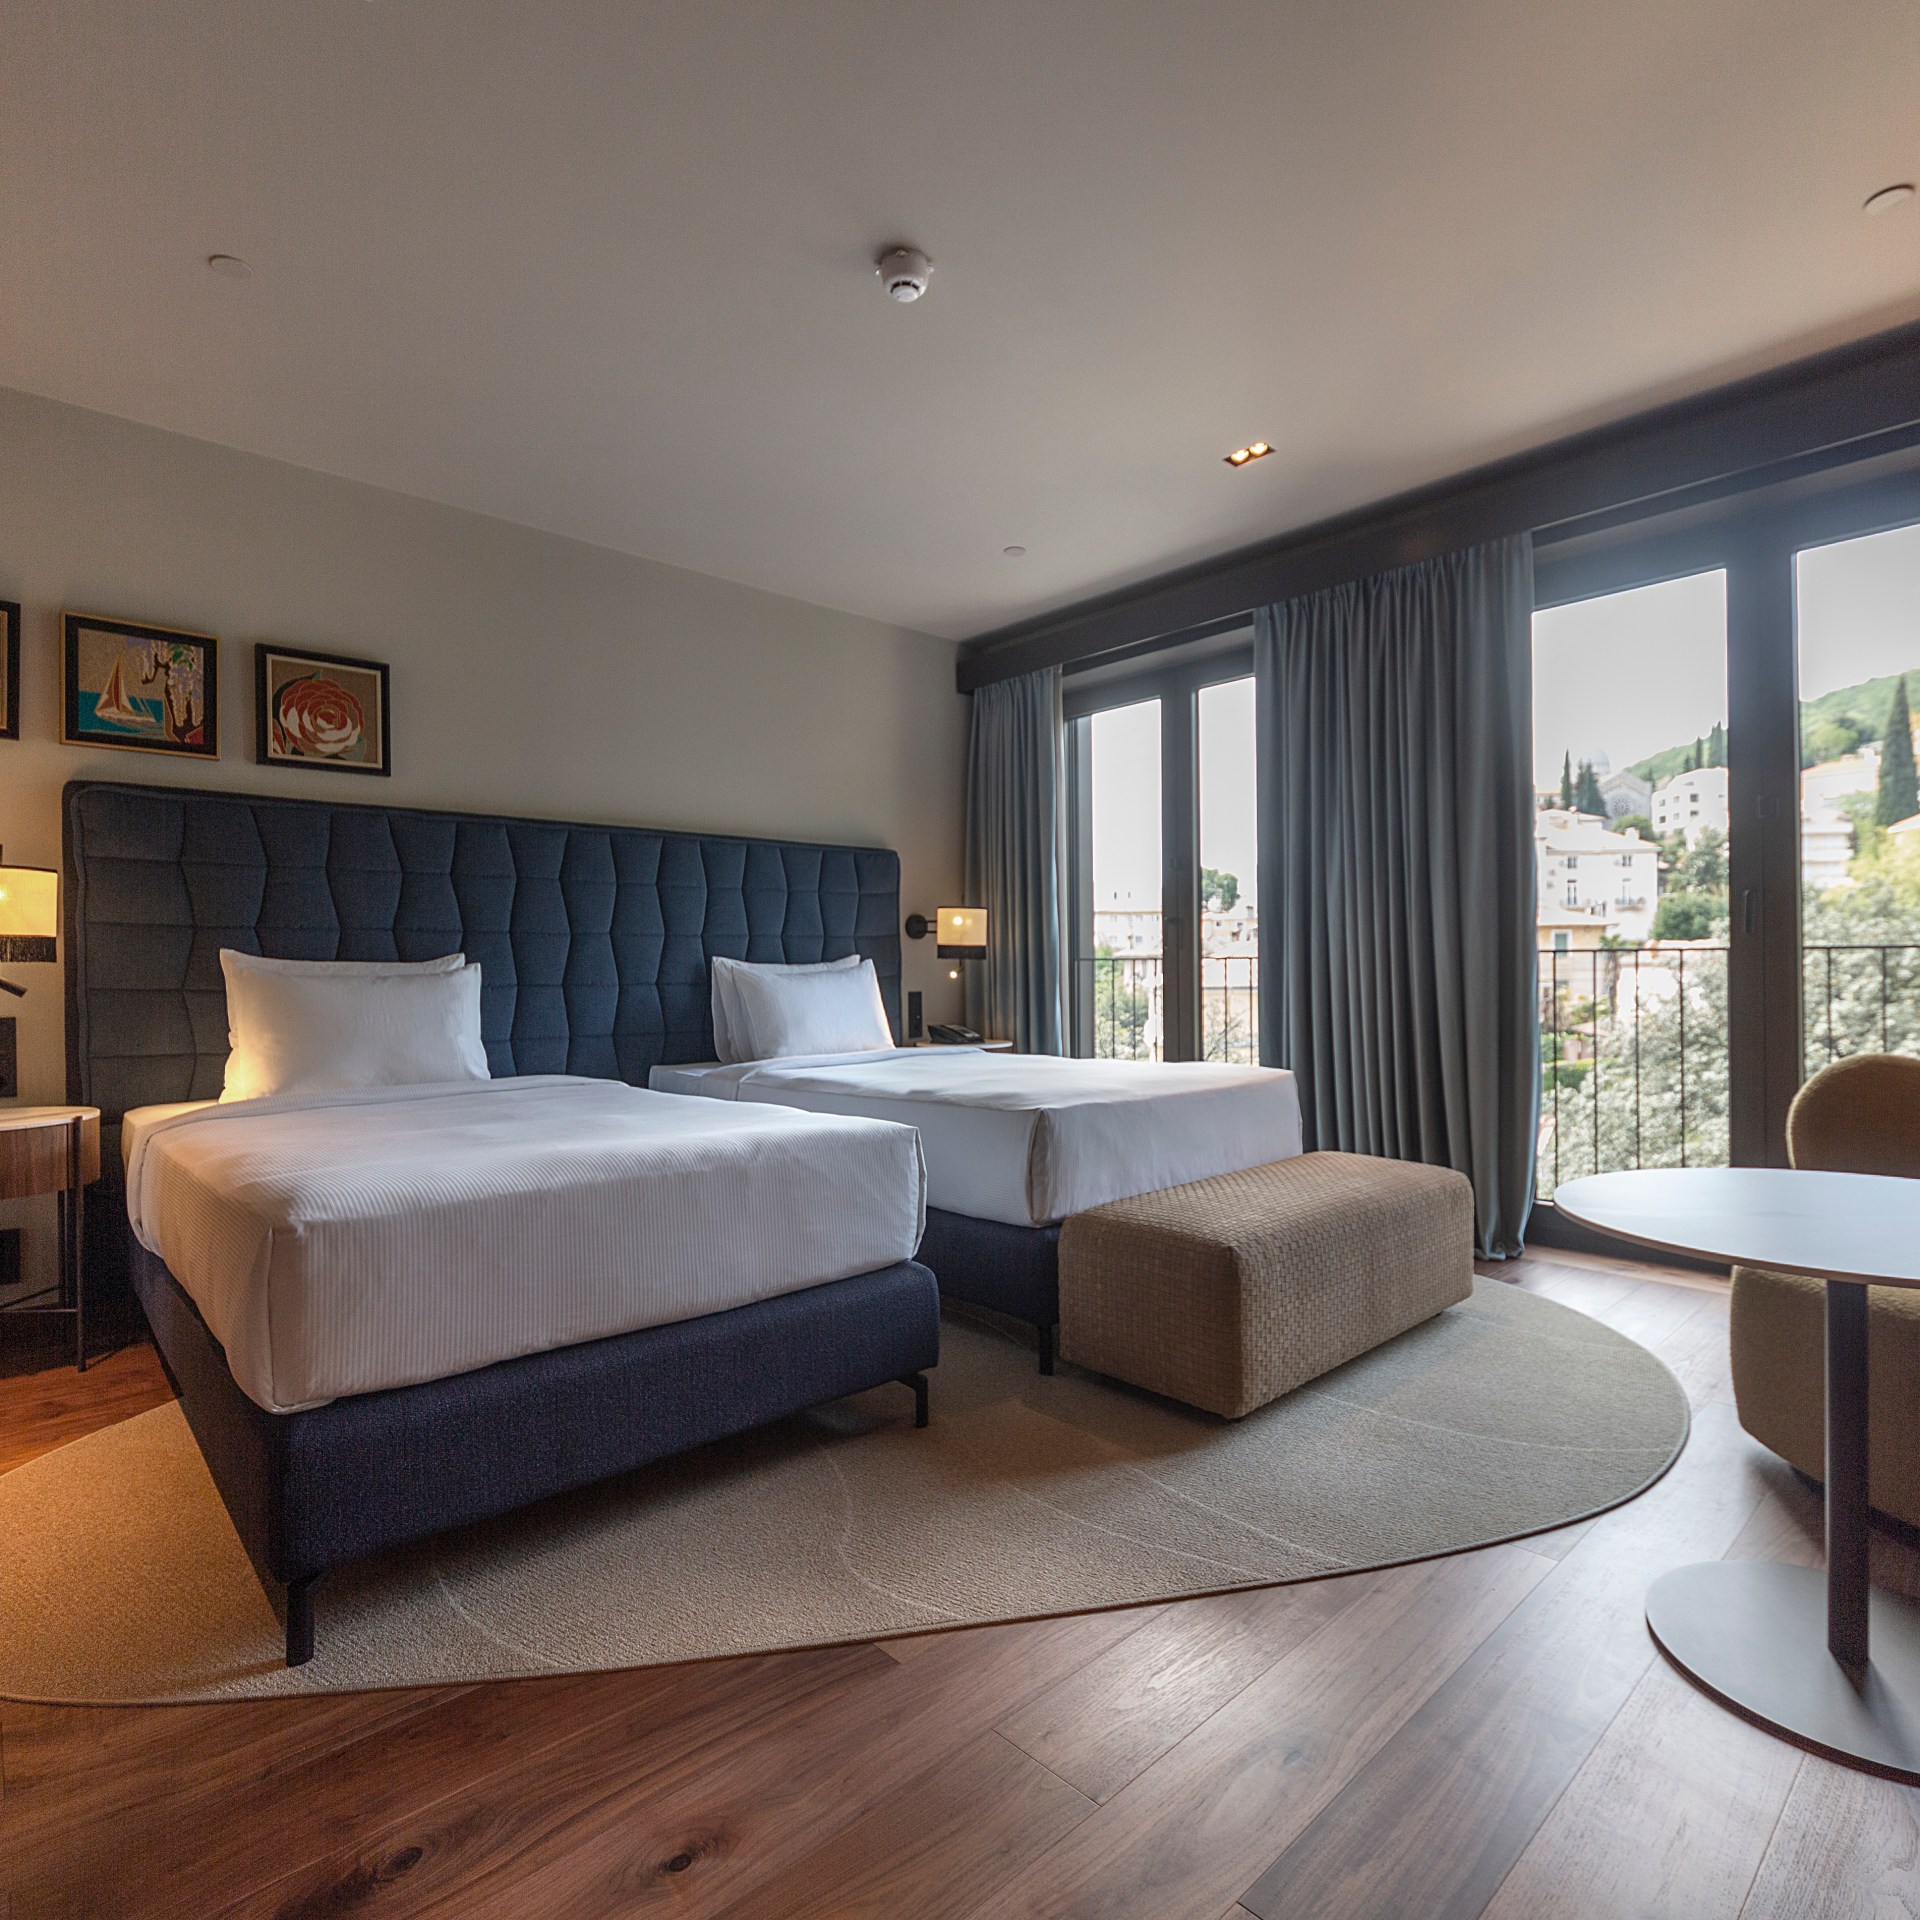 Keight Hotel Opatija, Curio Collection by HIlton - Guest Room